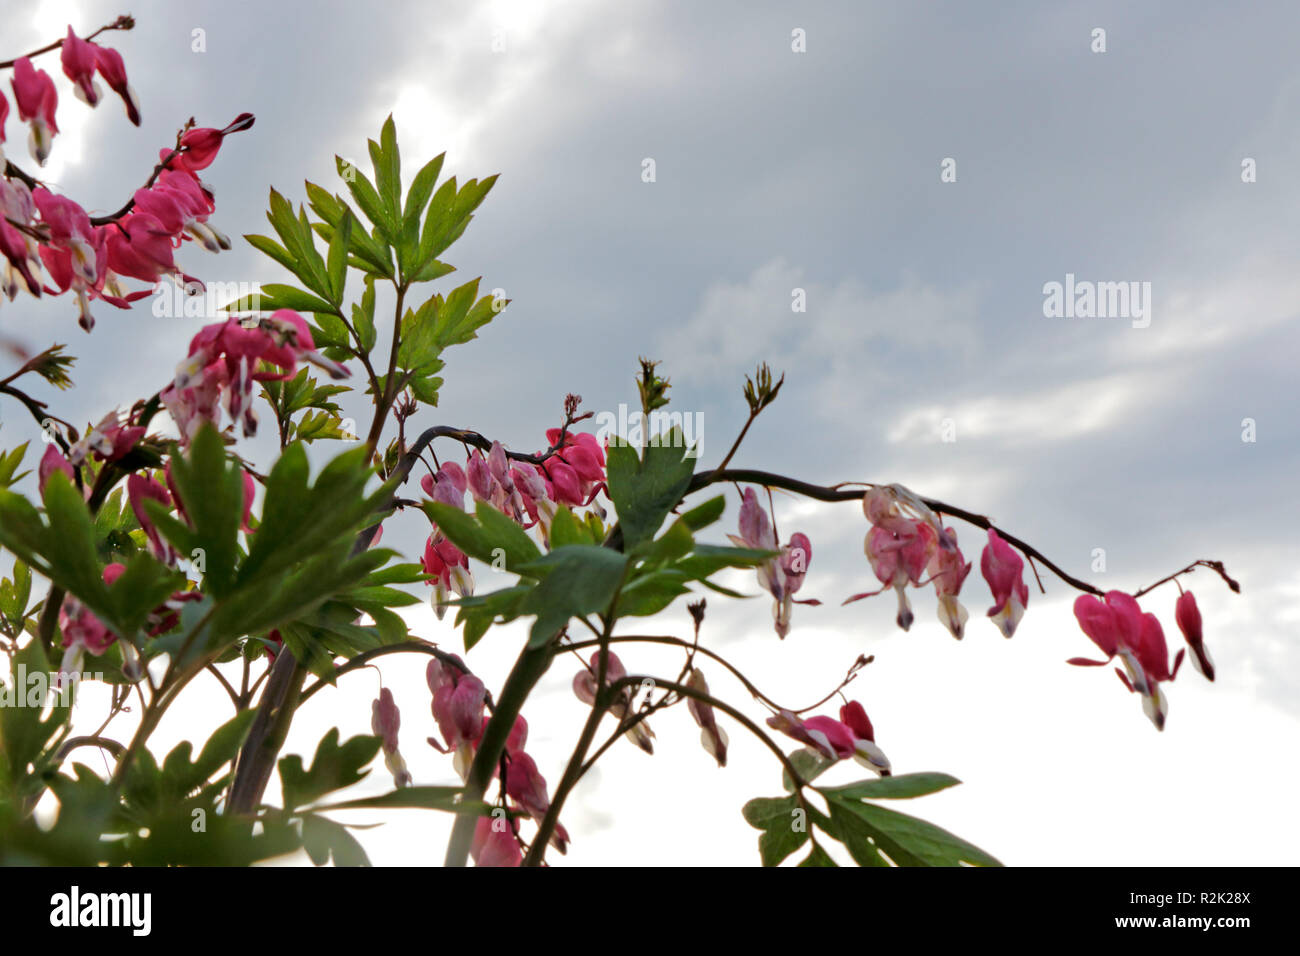 Bleeding heart in front of rain clouds Stock Photo